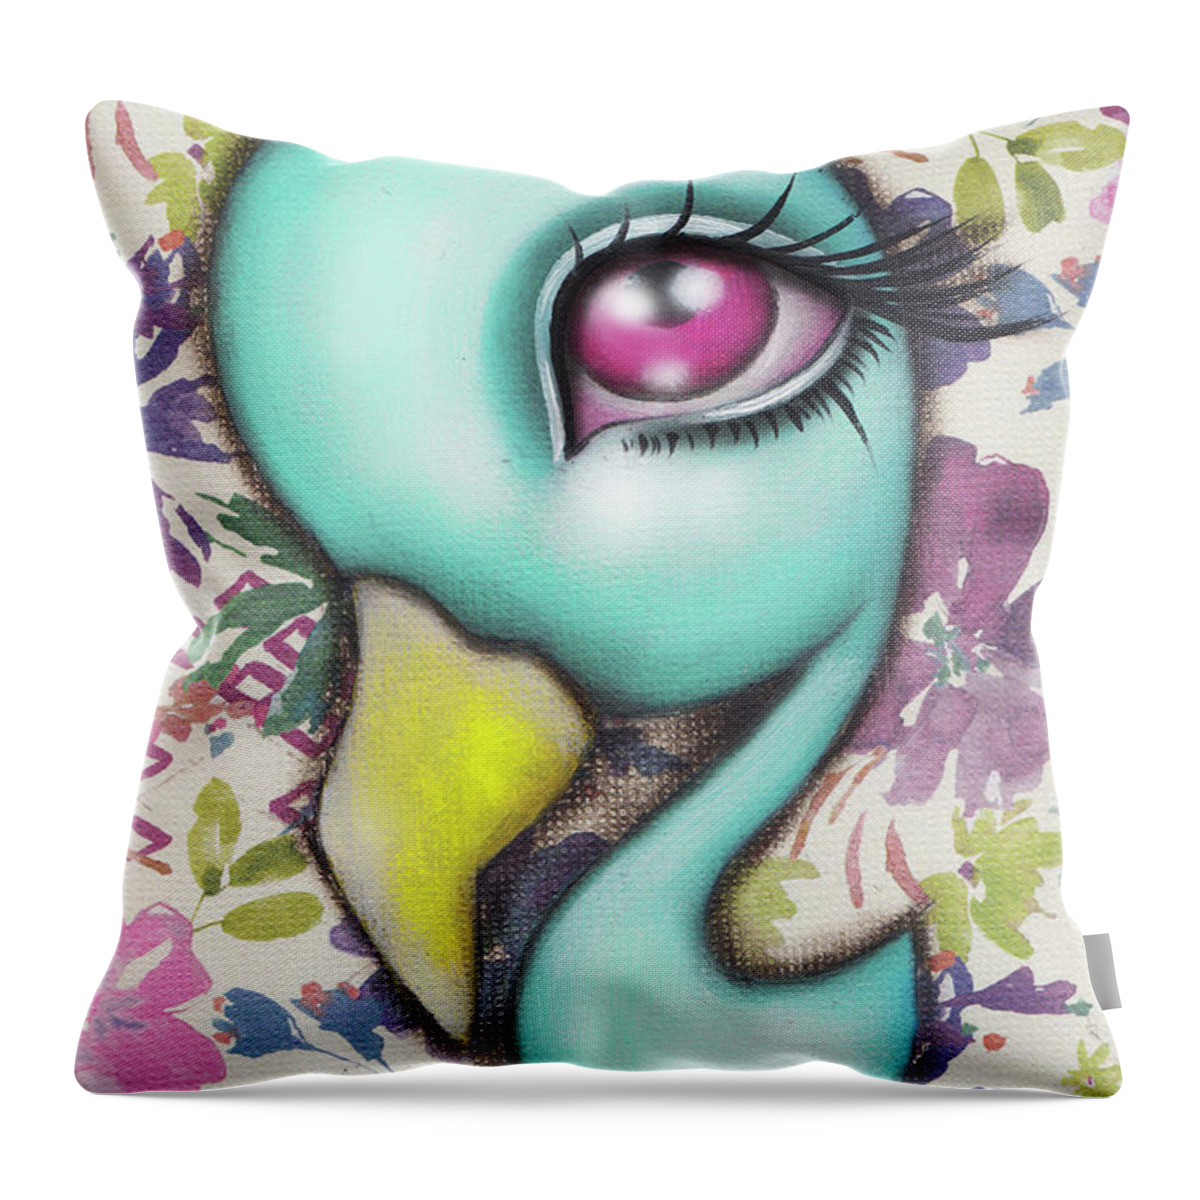 Whimsical Throw Pillow featuring the painting ax by Abril Andrade